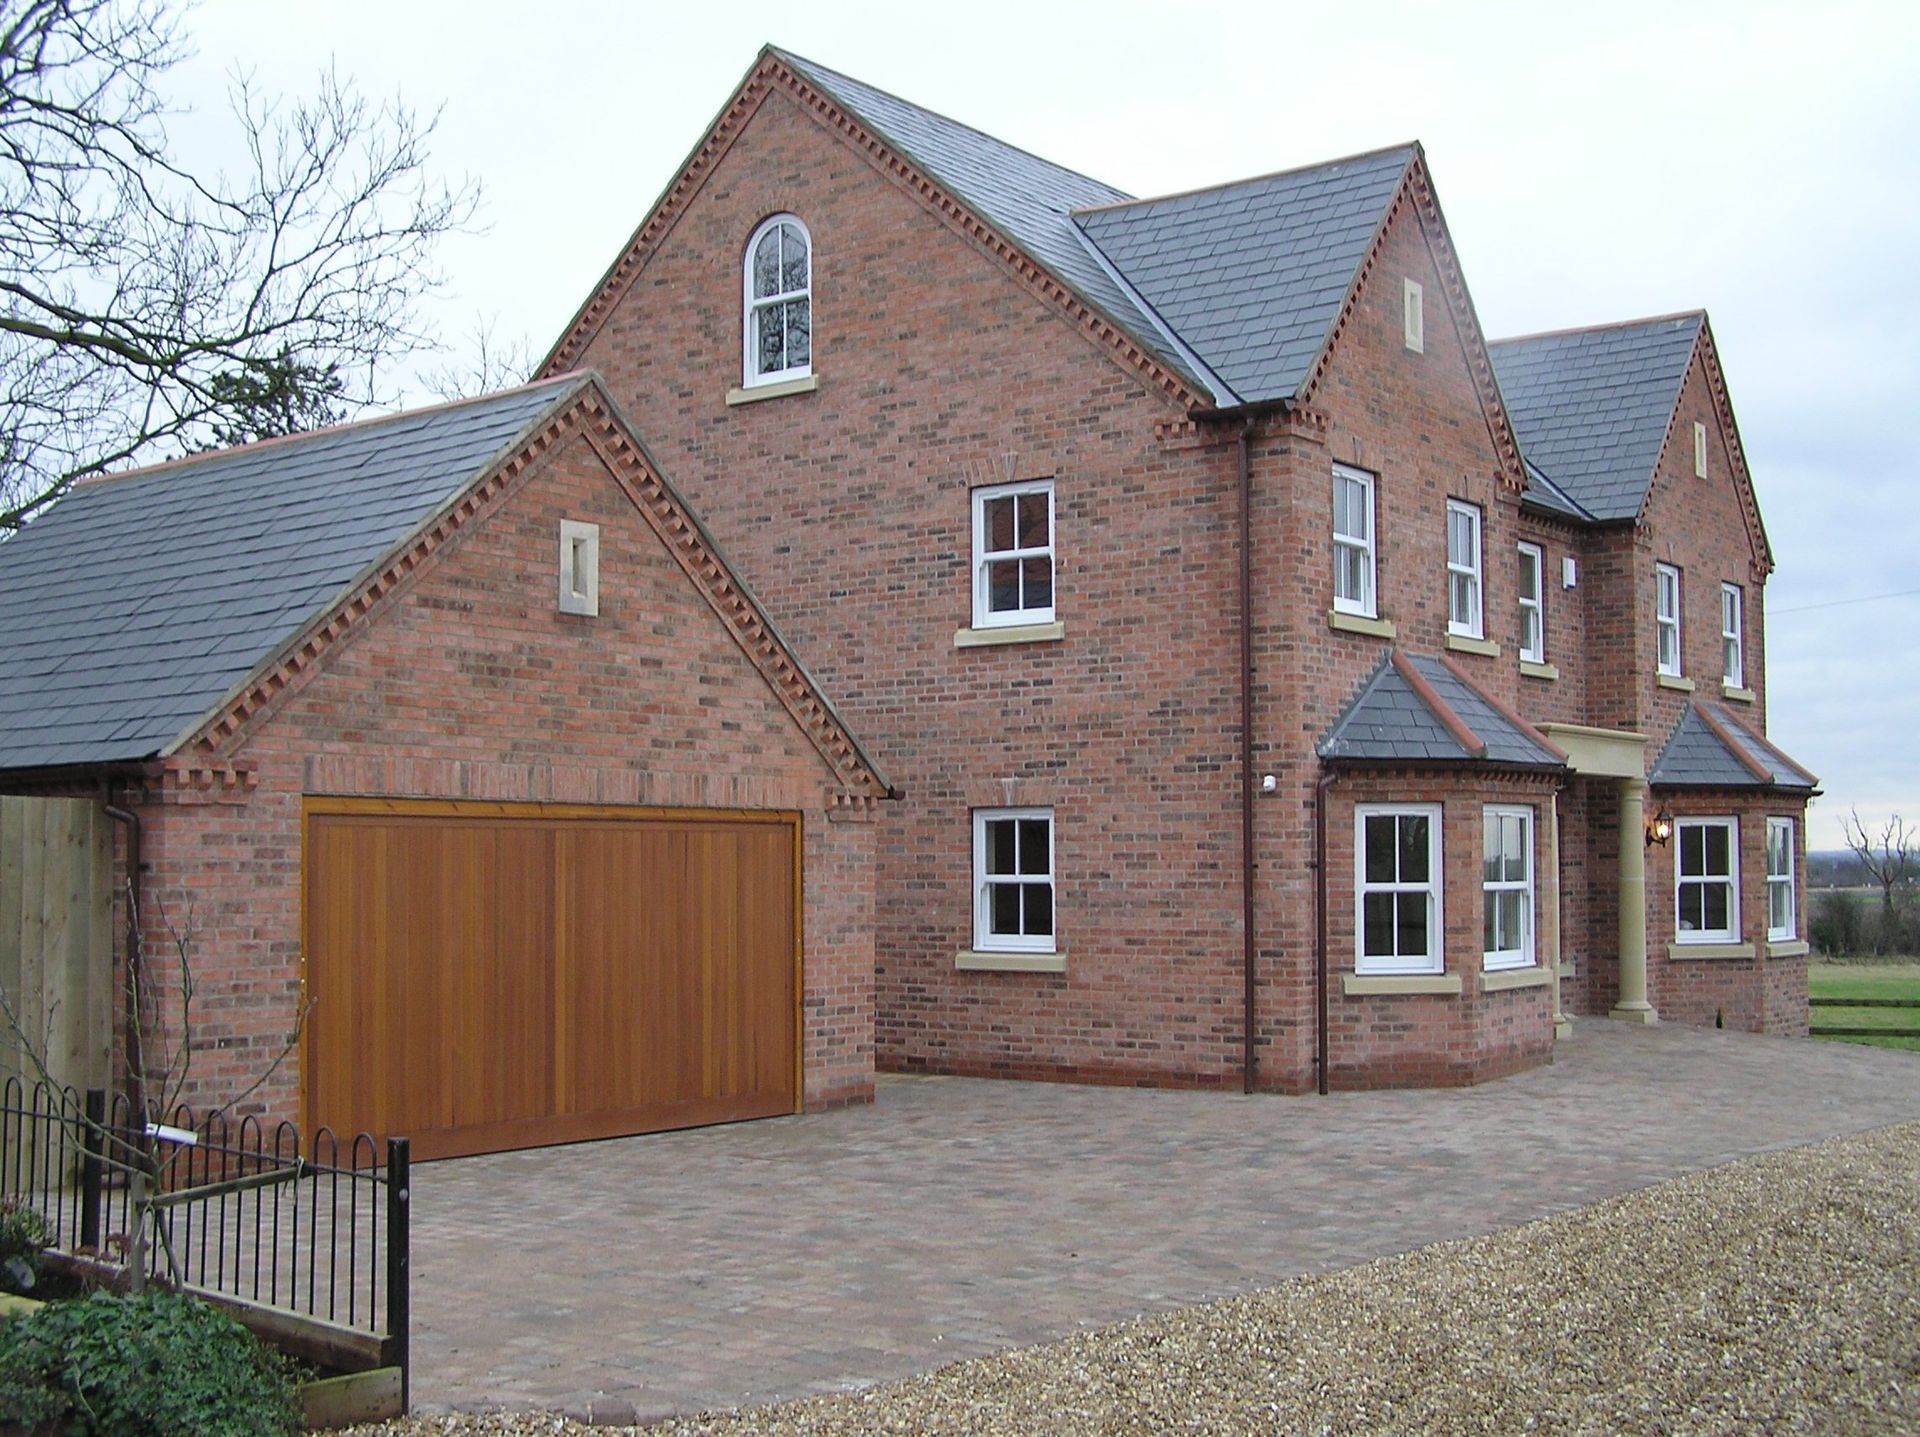 New homes in Nottinghamshire and Licolnshire